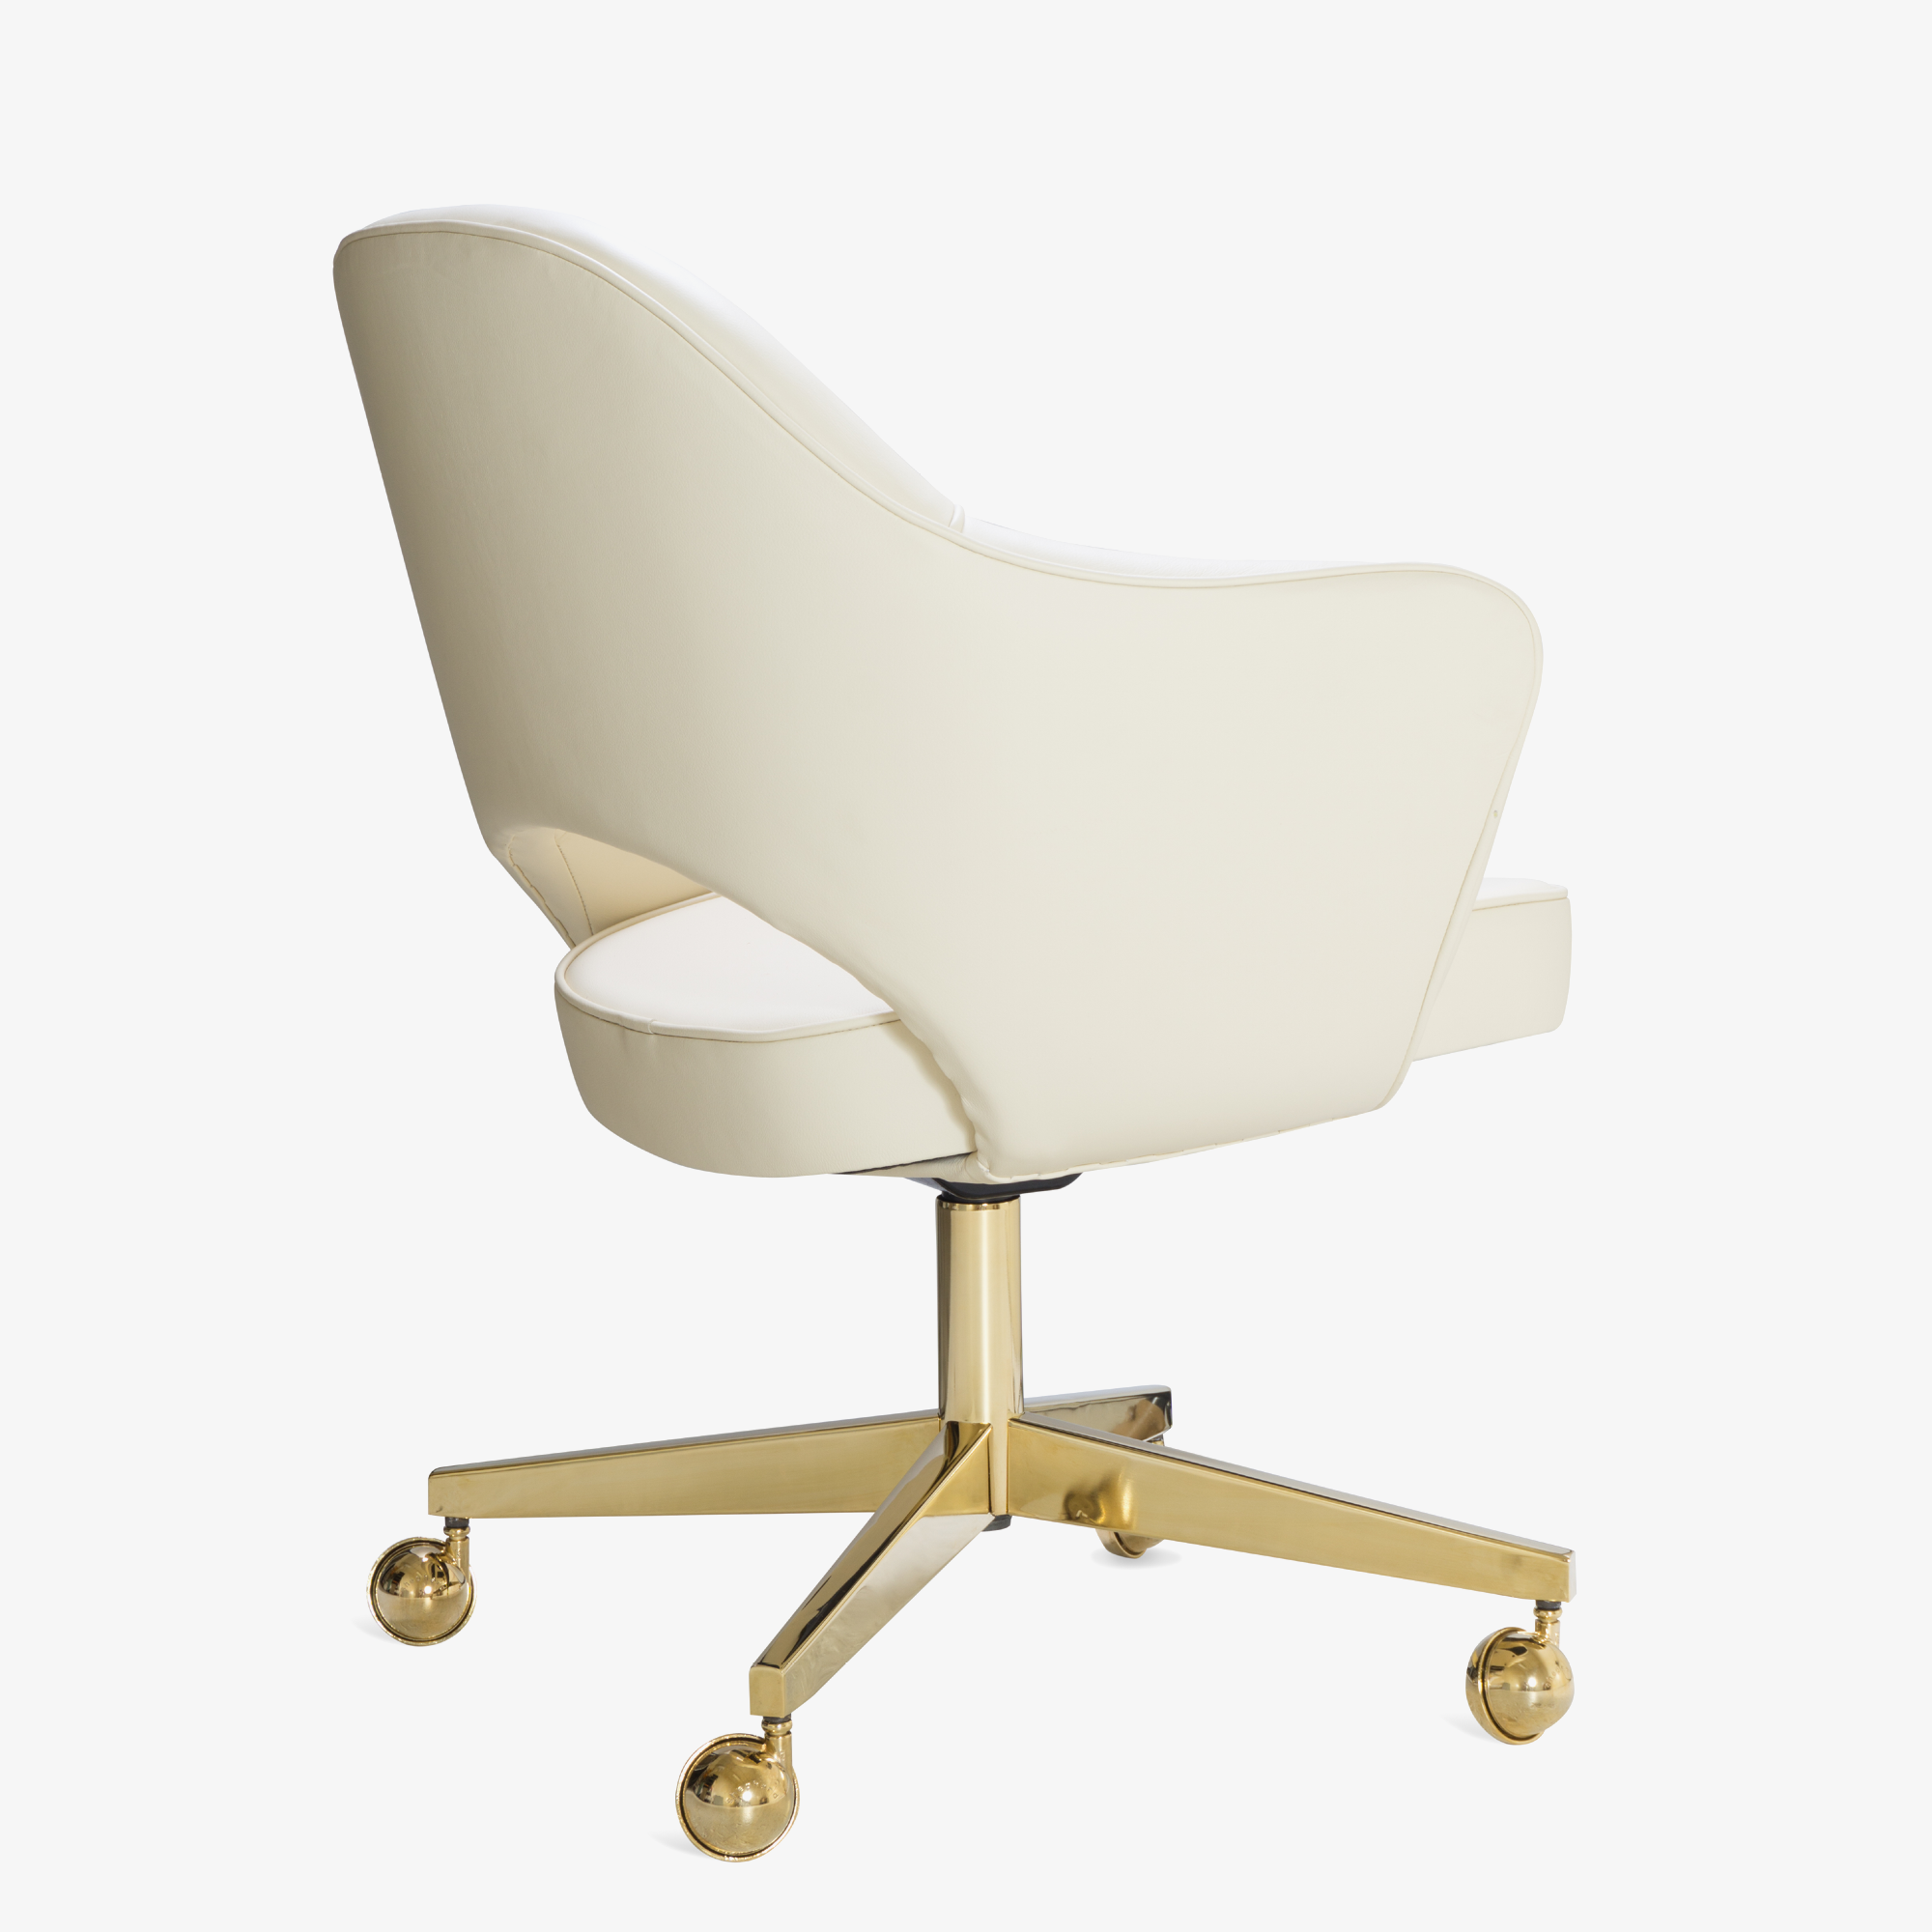 Saarinen Executive Arm Chair in Creme Leather, Swivel Base, 24k Gold Edition4.png